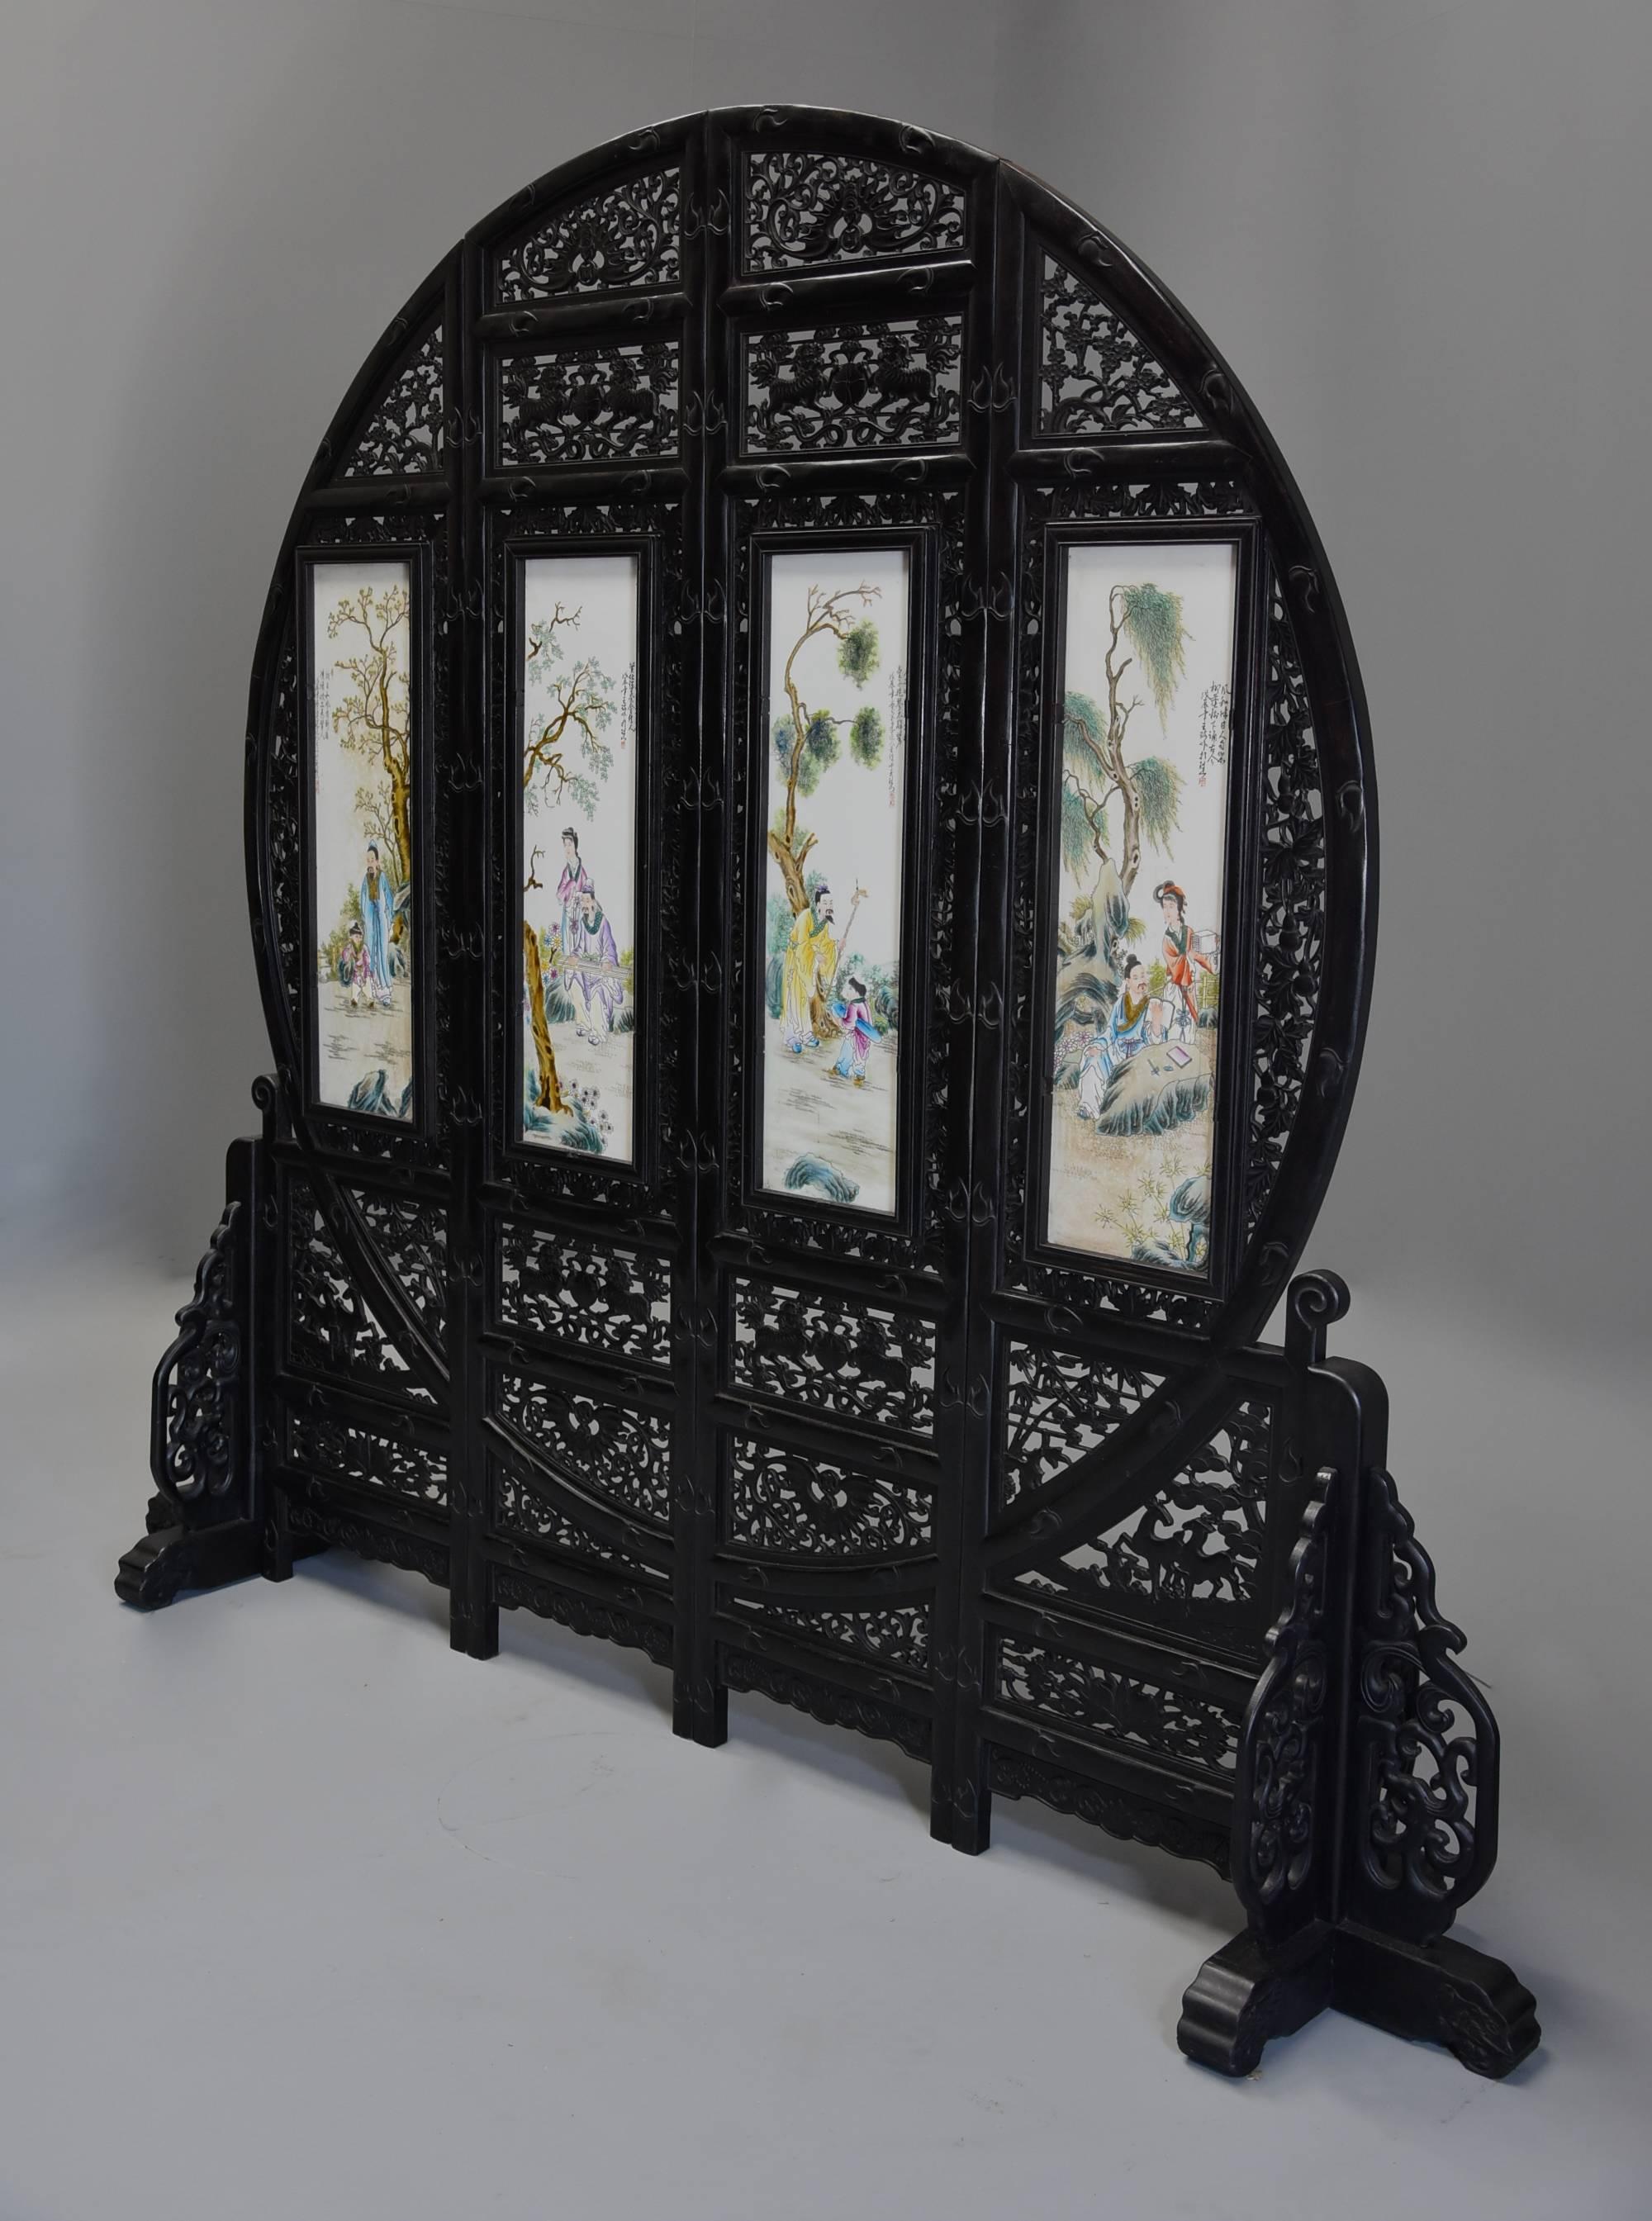 Porcelain Excellent Quality Large Chinese Circular Carved Hardwood Four-Panel Screen